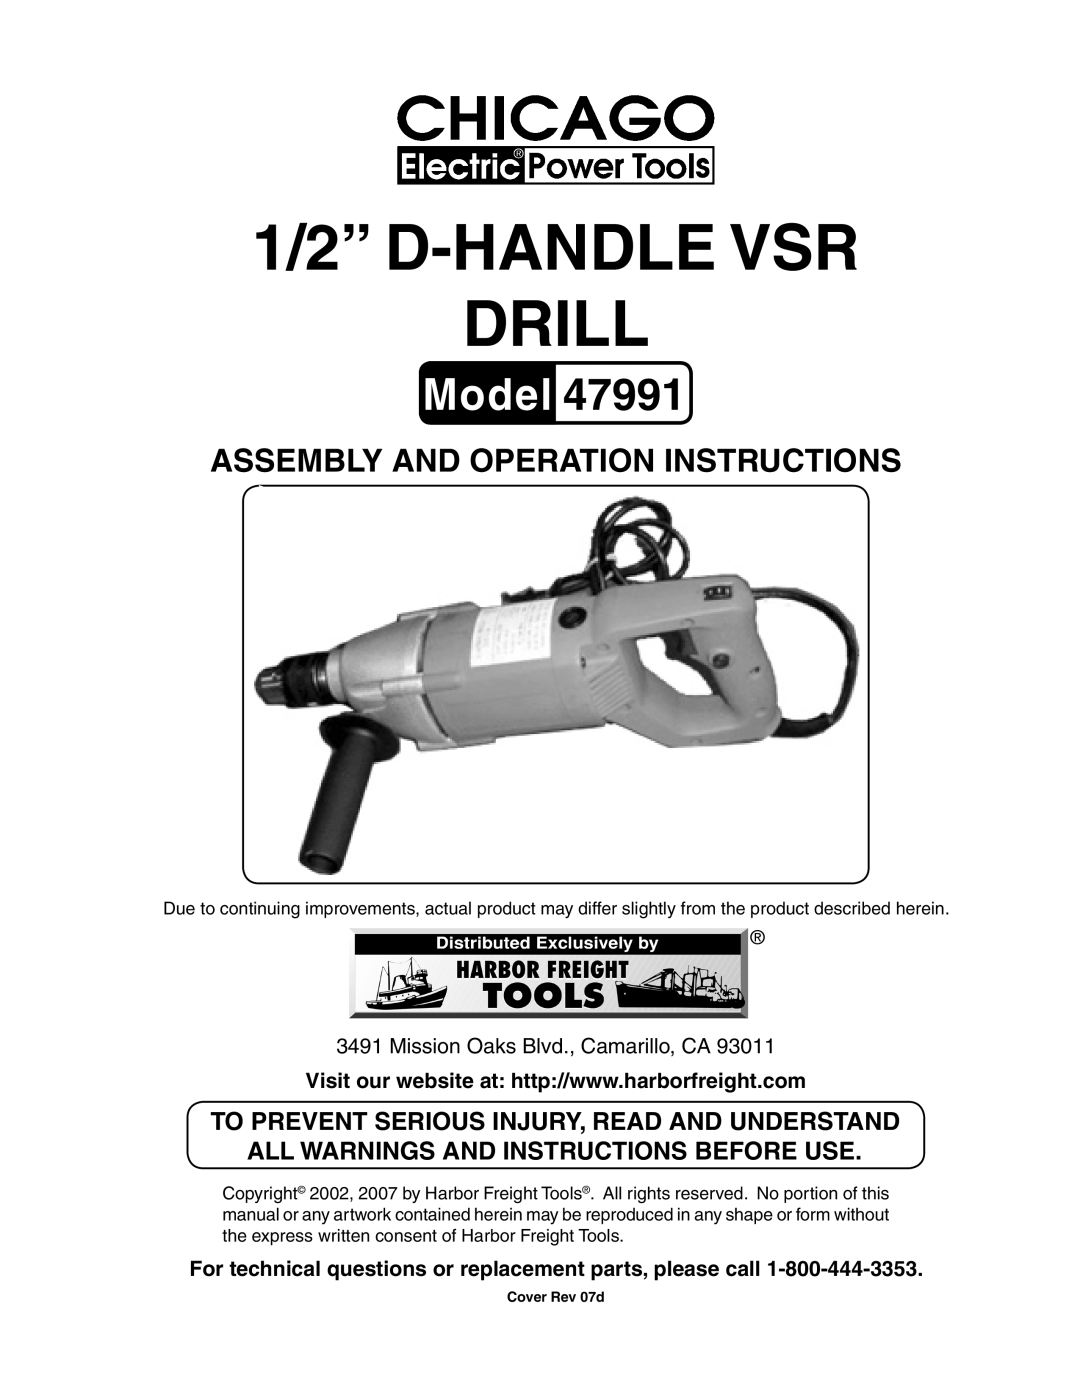 Harbor Freight Tools 47991 manual To prevent serious injury, read and understand, all warnings and instructions before use 